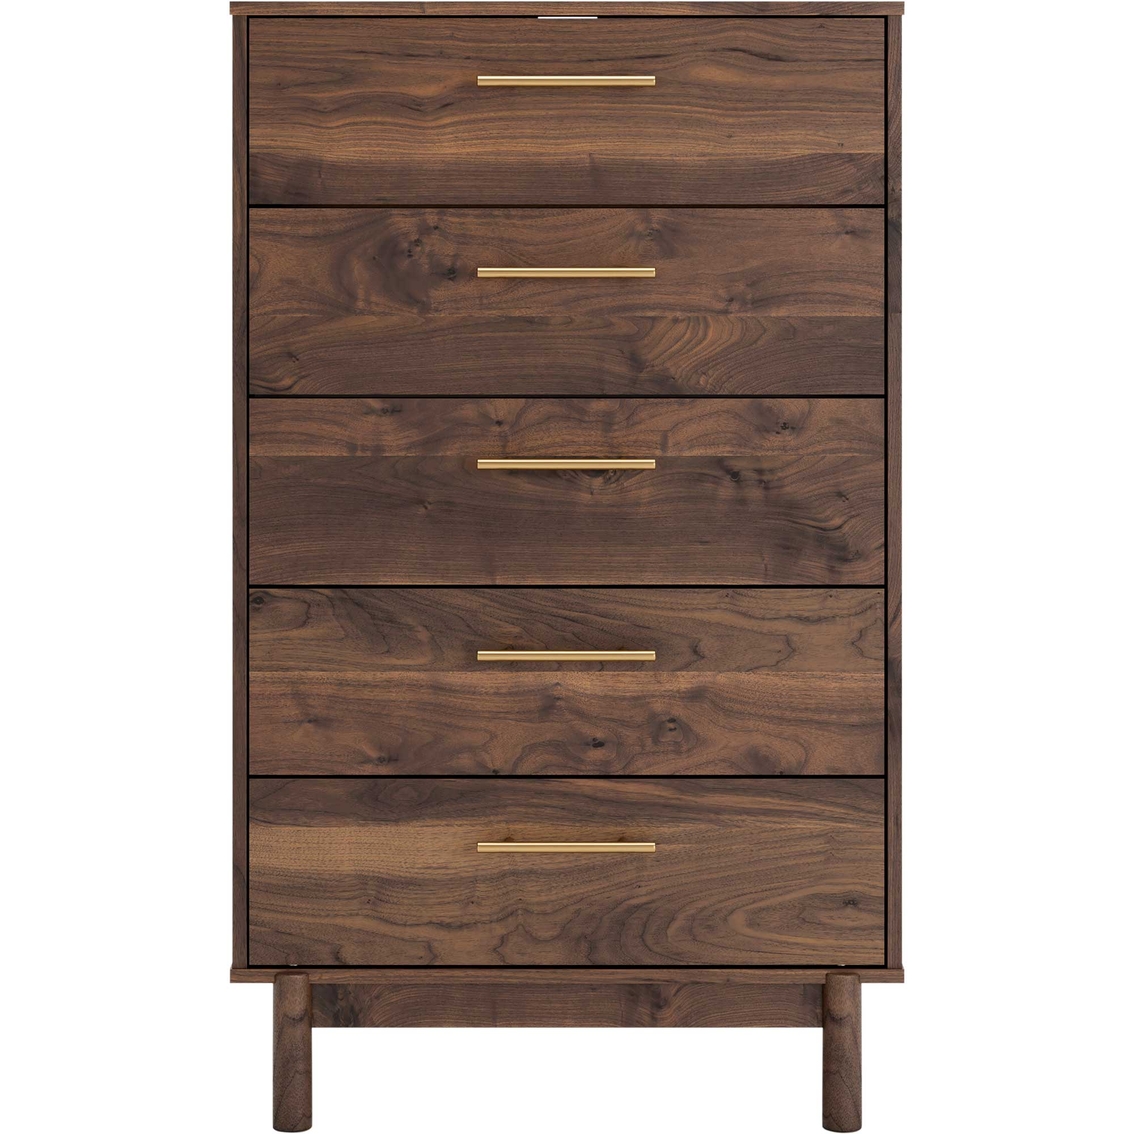 Signature Design by Ashley Ready to Assemble Calverson Chest of Drawers - Image 2 of 6